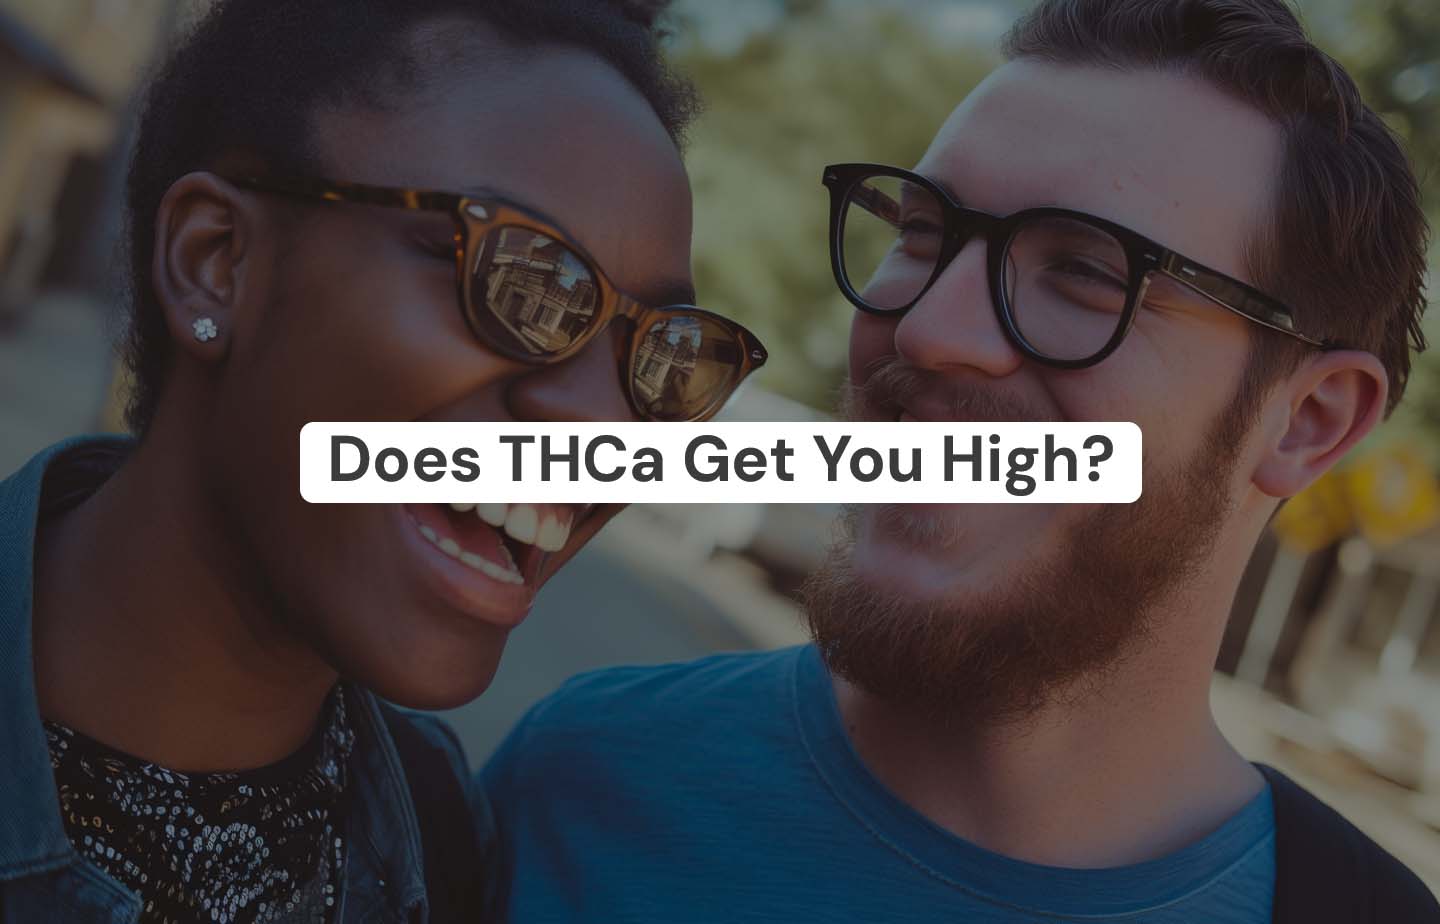 Does THCA Get You High